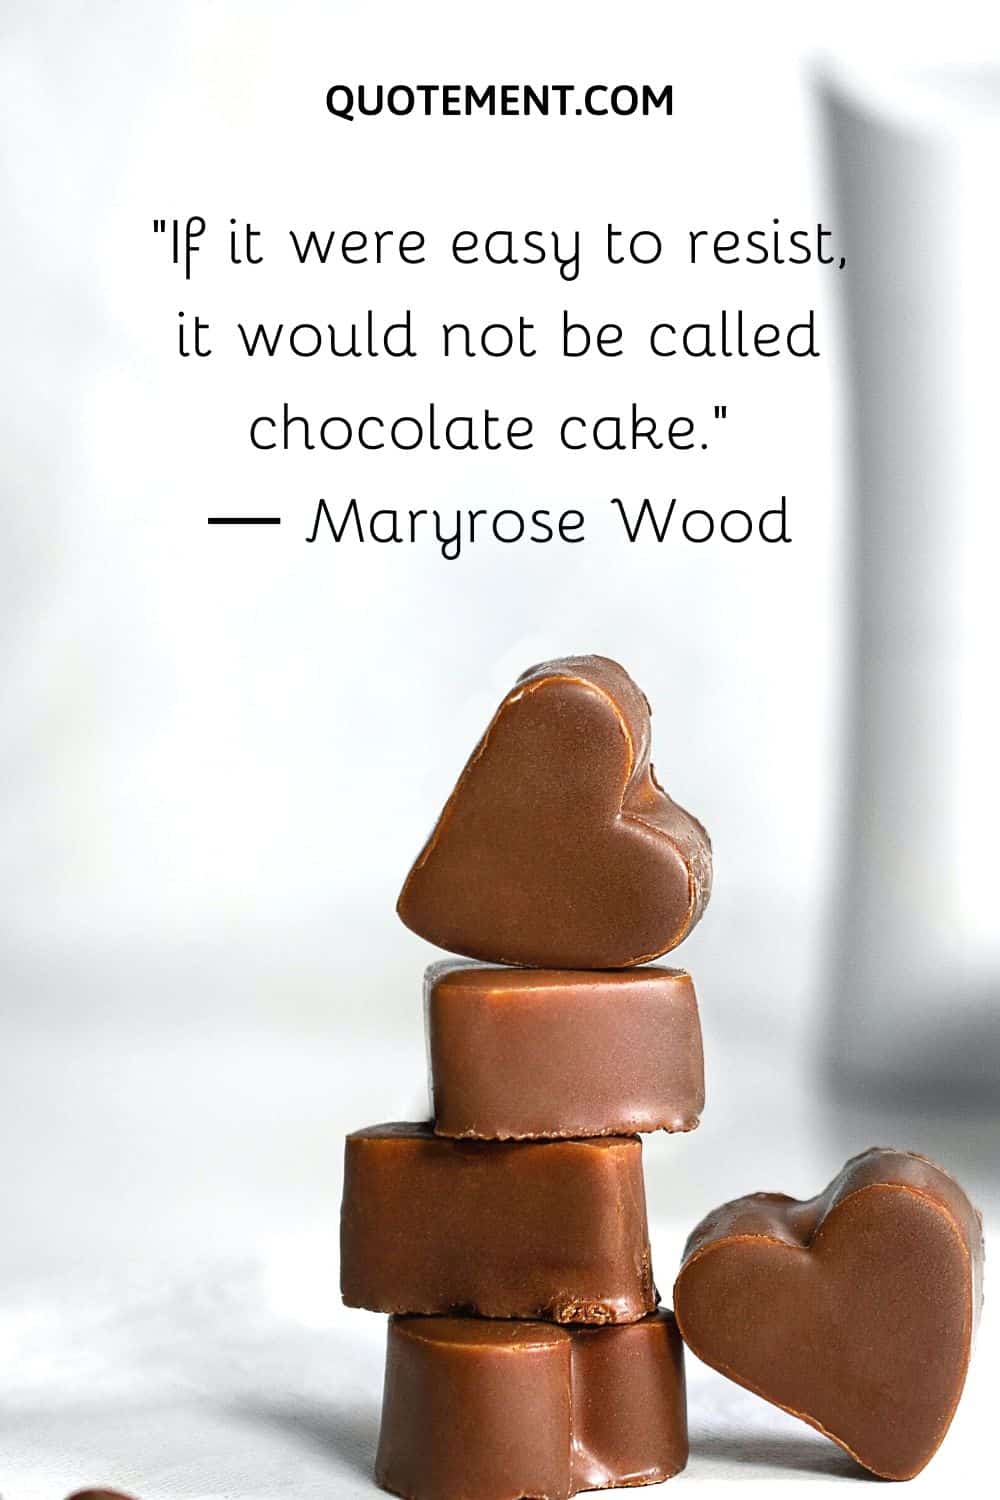 “If it were easy to resist, it would not be called chocolate cake.” ― Maryrose Wood